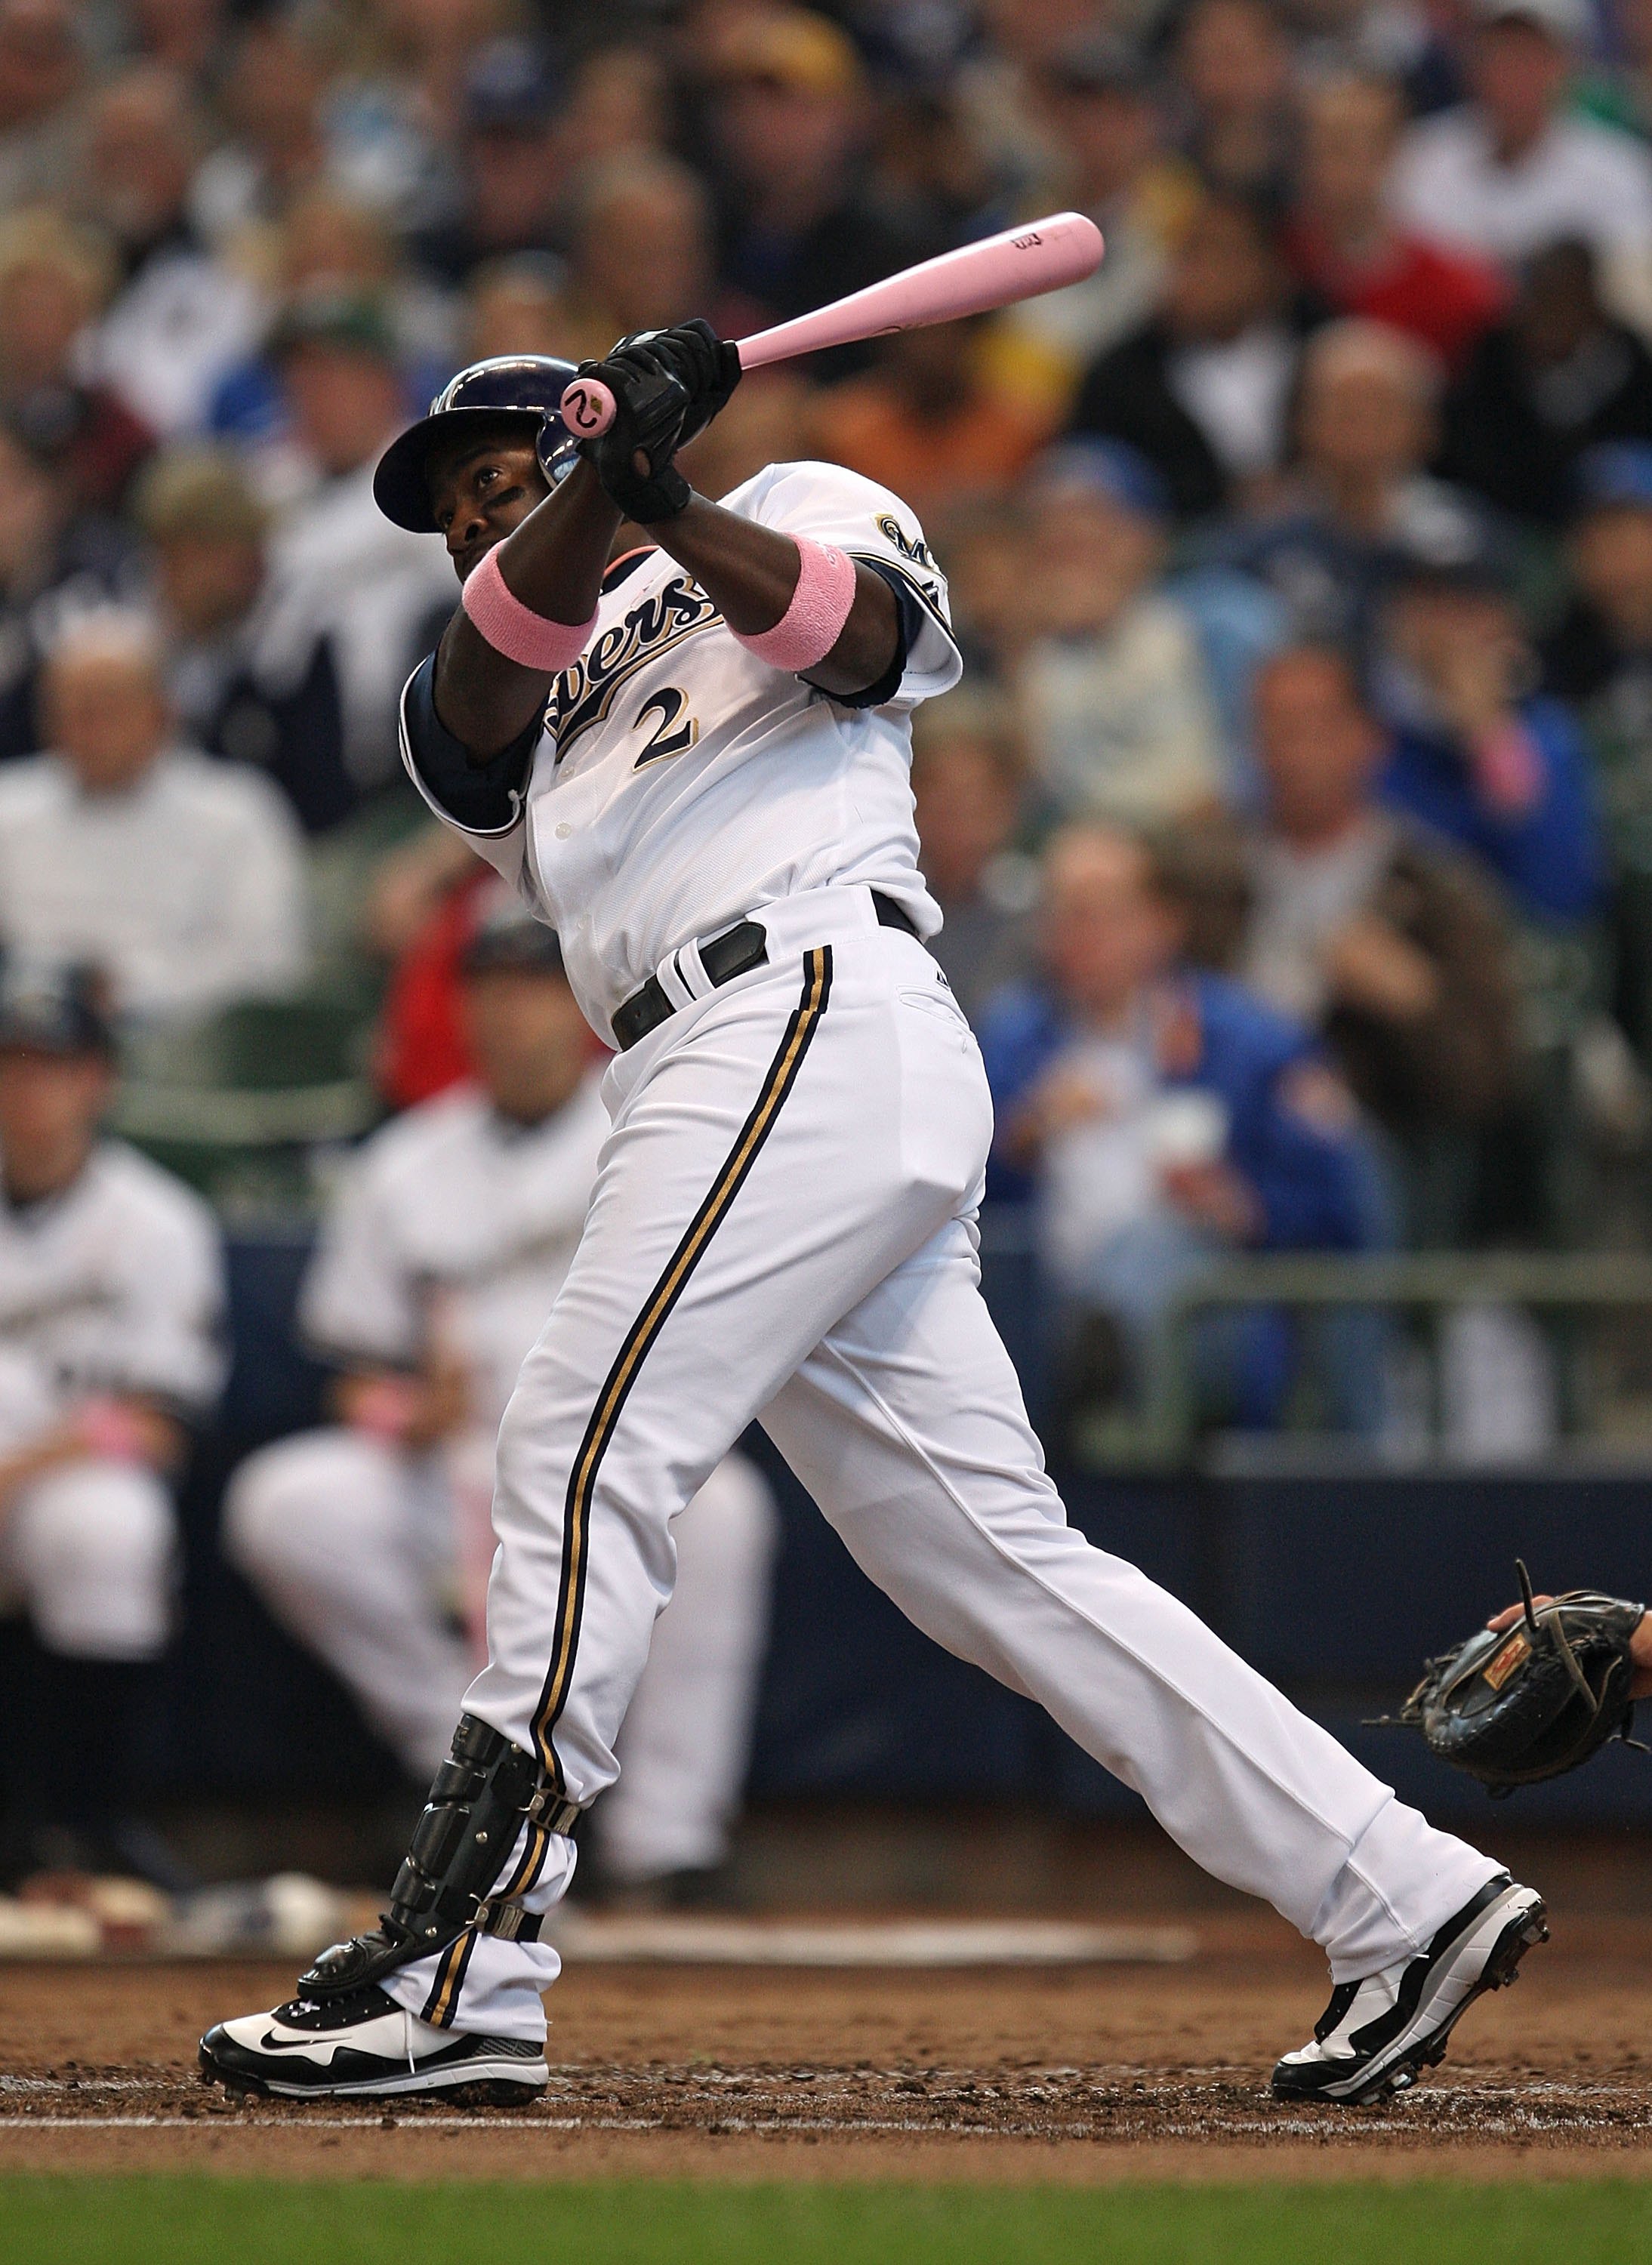 MILWAUKEE - MAY 10: Bill Hall #2 of the Milwaukee Brewers takes a swing against the Chicago Cubs on May 10, 2009 at Miller Park in Milwaukee, Wisconsin. The Cubs defeated the Brewers 4-2. (Photo by Jonathan Daniel/Getty Images)